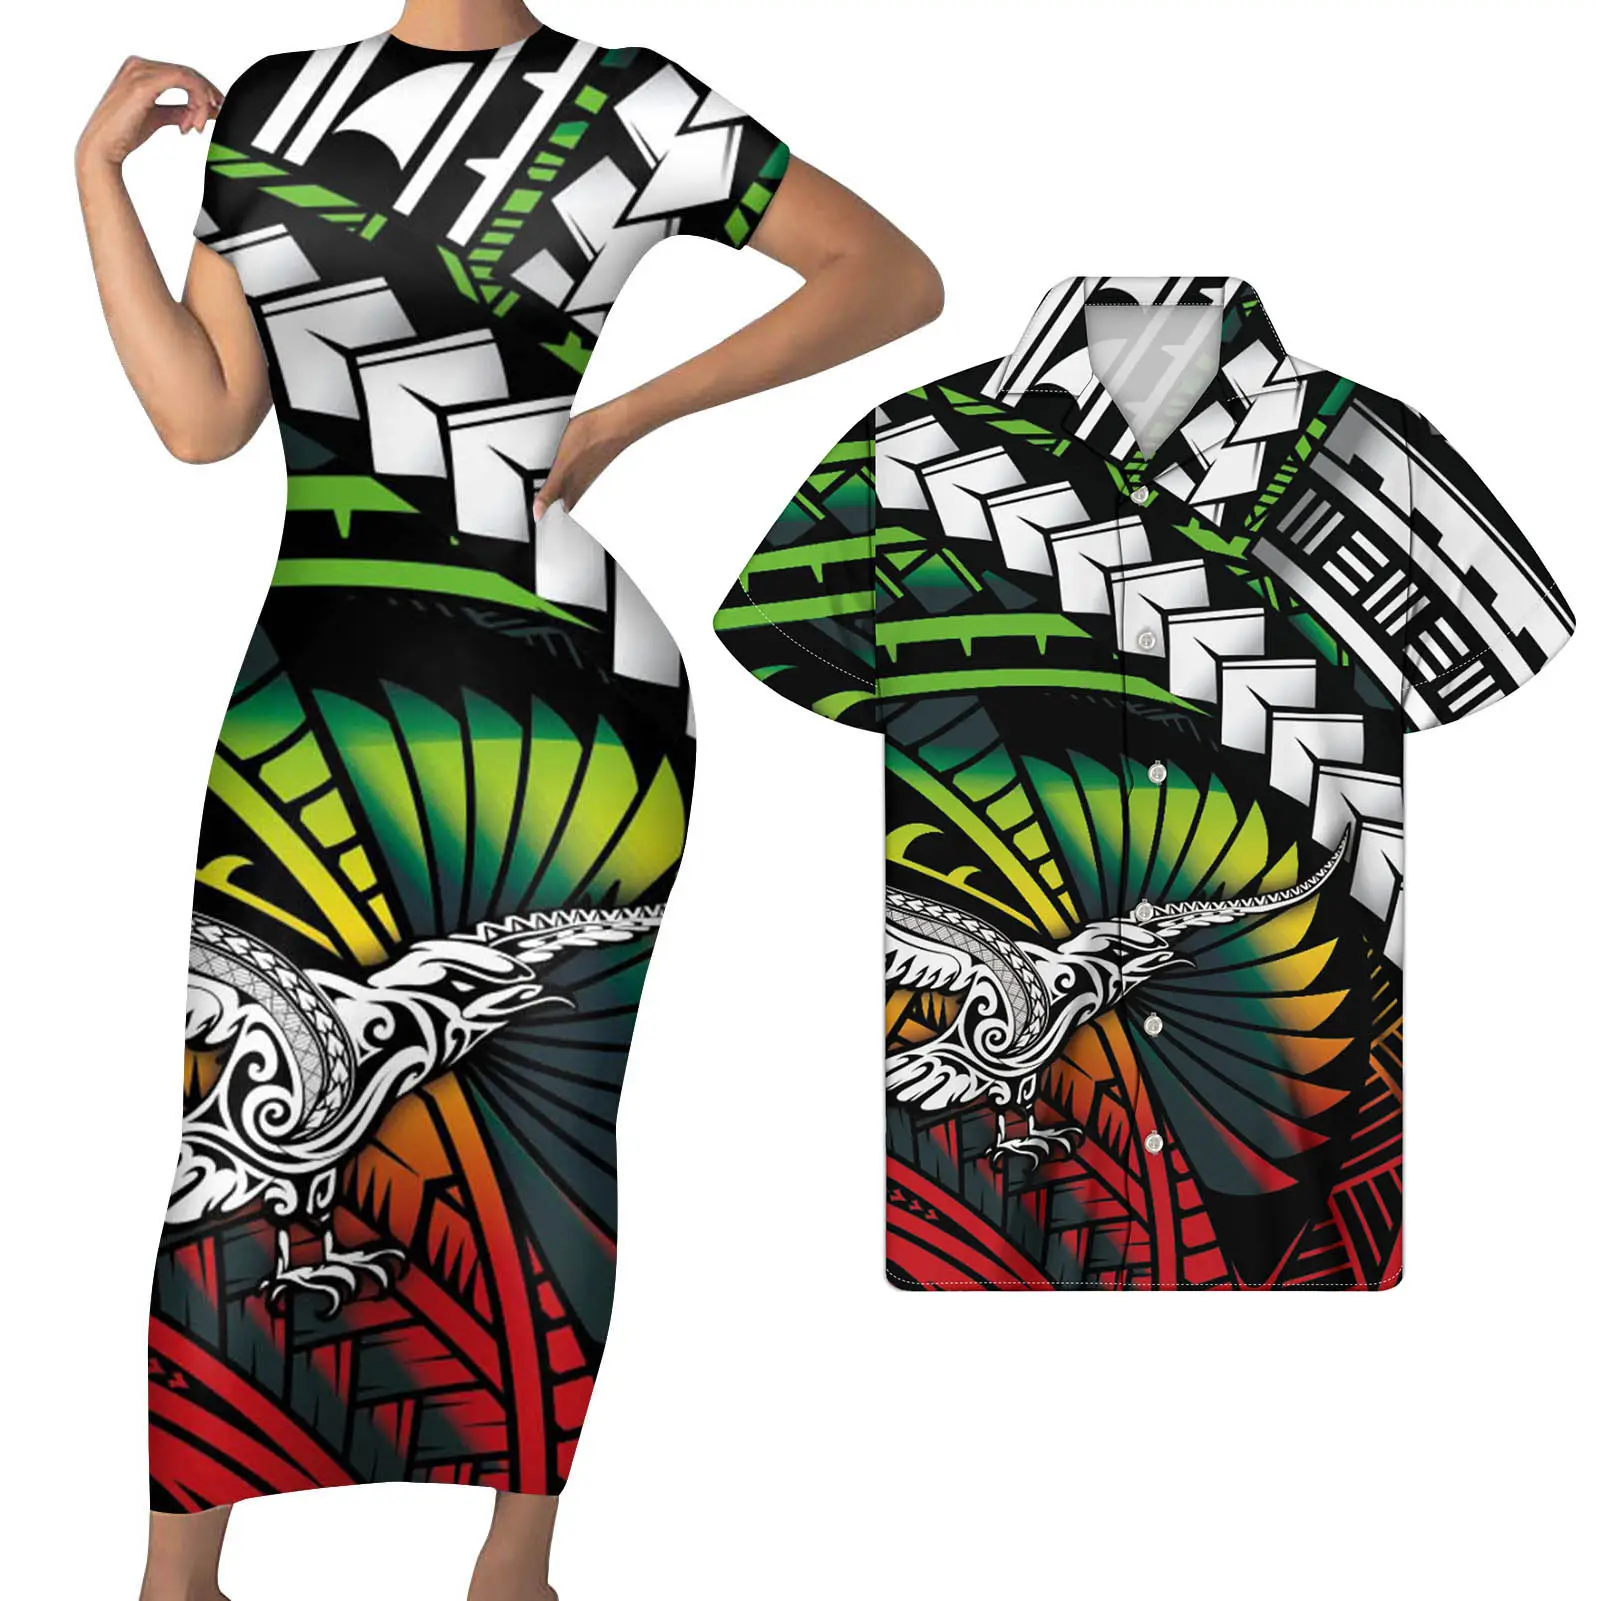 Colorful Design Polynesian Tribal Couple Outfit Women For Club Dress Long with Shorts Sleeve Match Men Shirts Plus Size